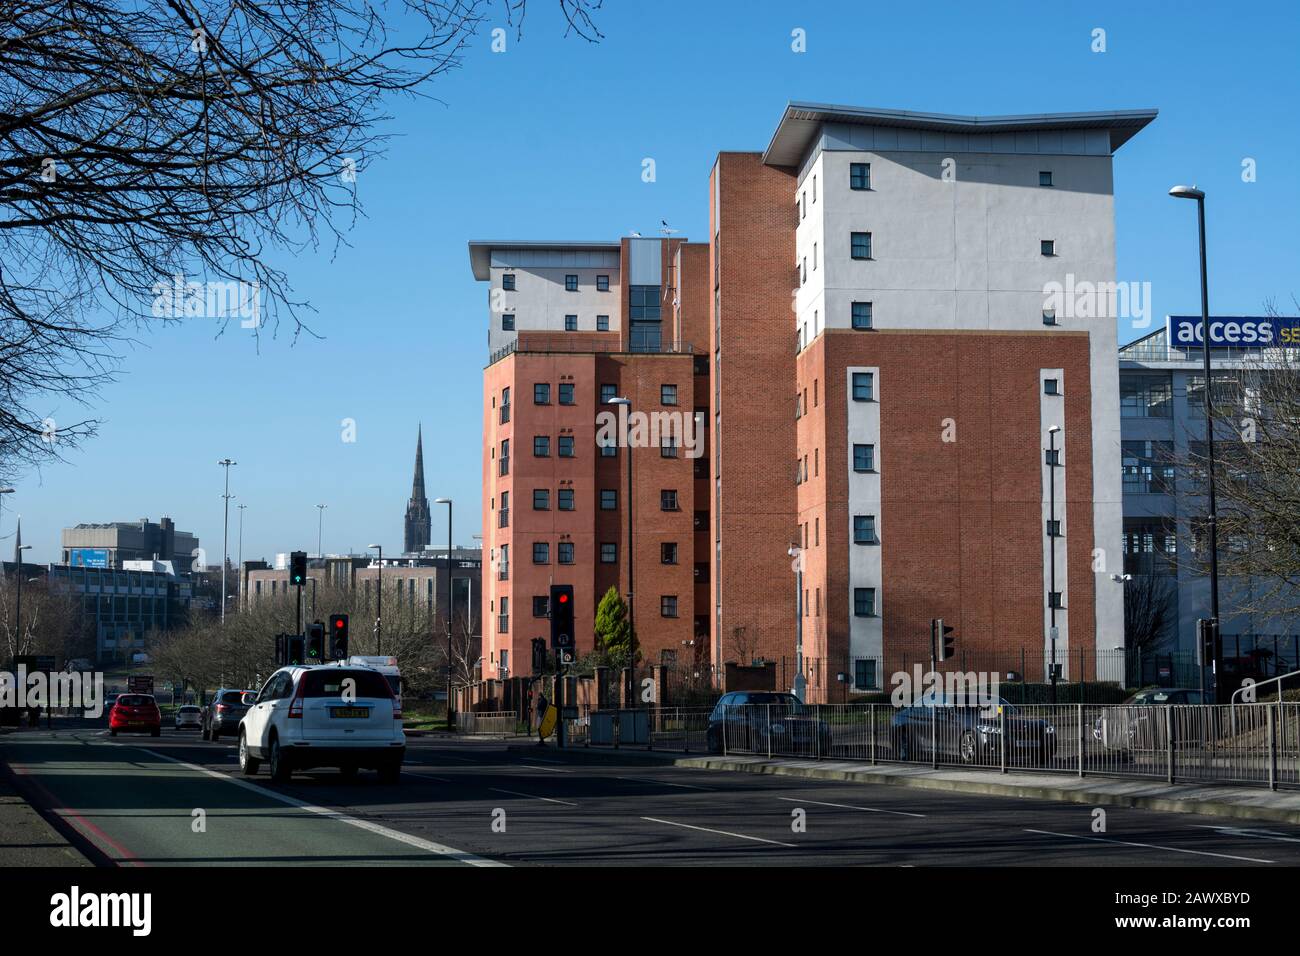 Sky Blue Way und Liberty Point Student Accommodation Building, Coventry, Großbritannien Stockfoto